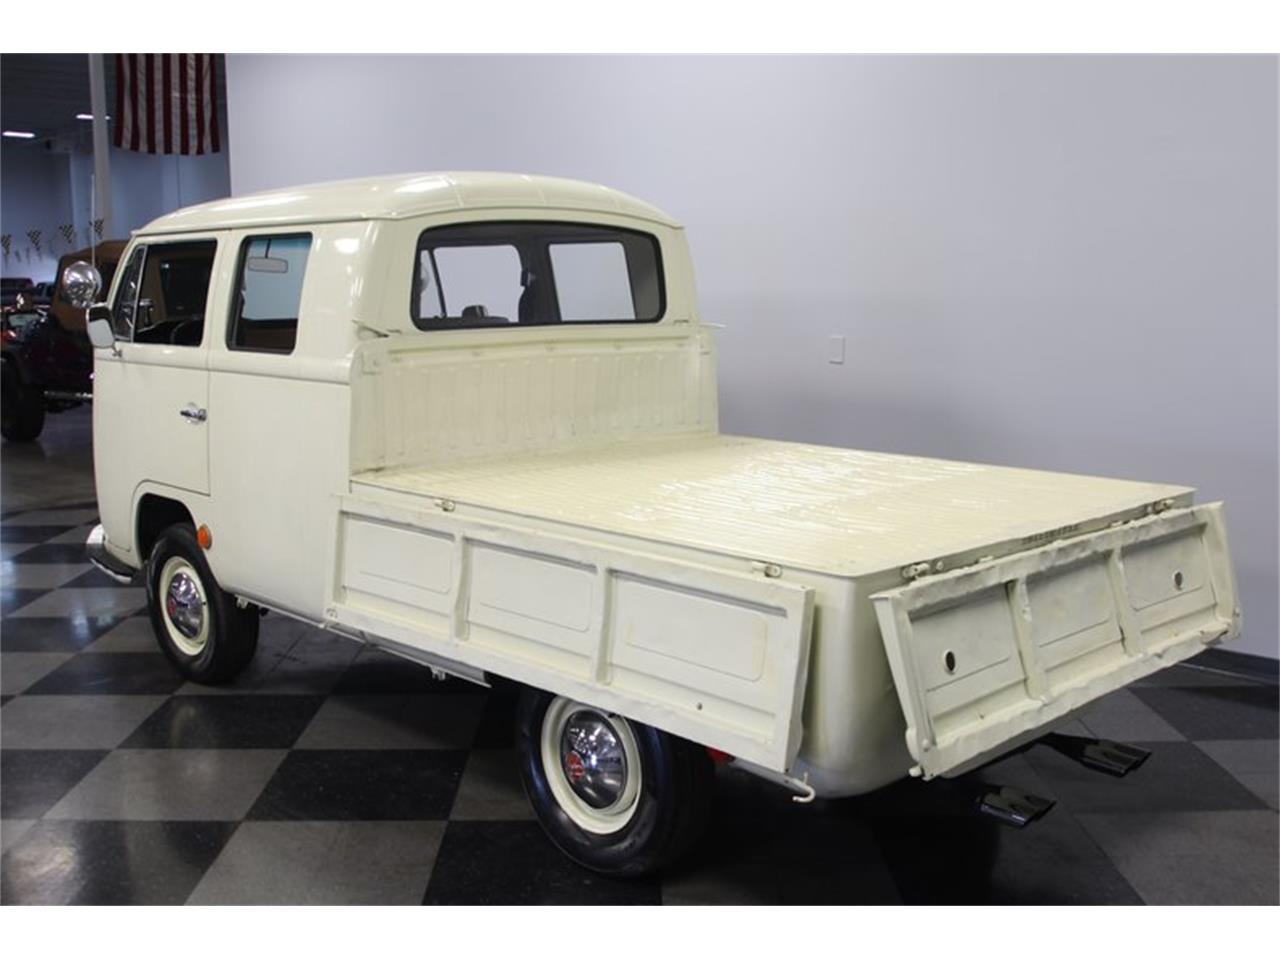 1968 Volkswagen Transporter for sale in Concord, NC – photo 68